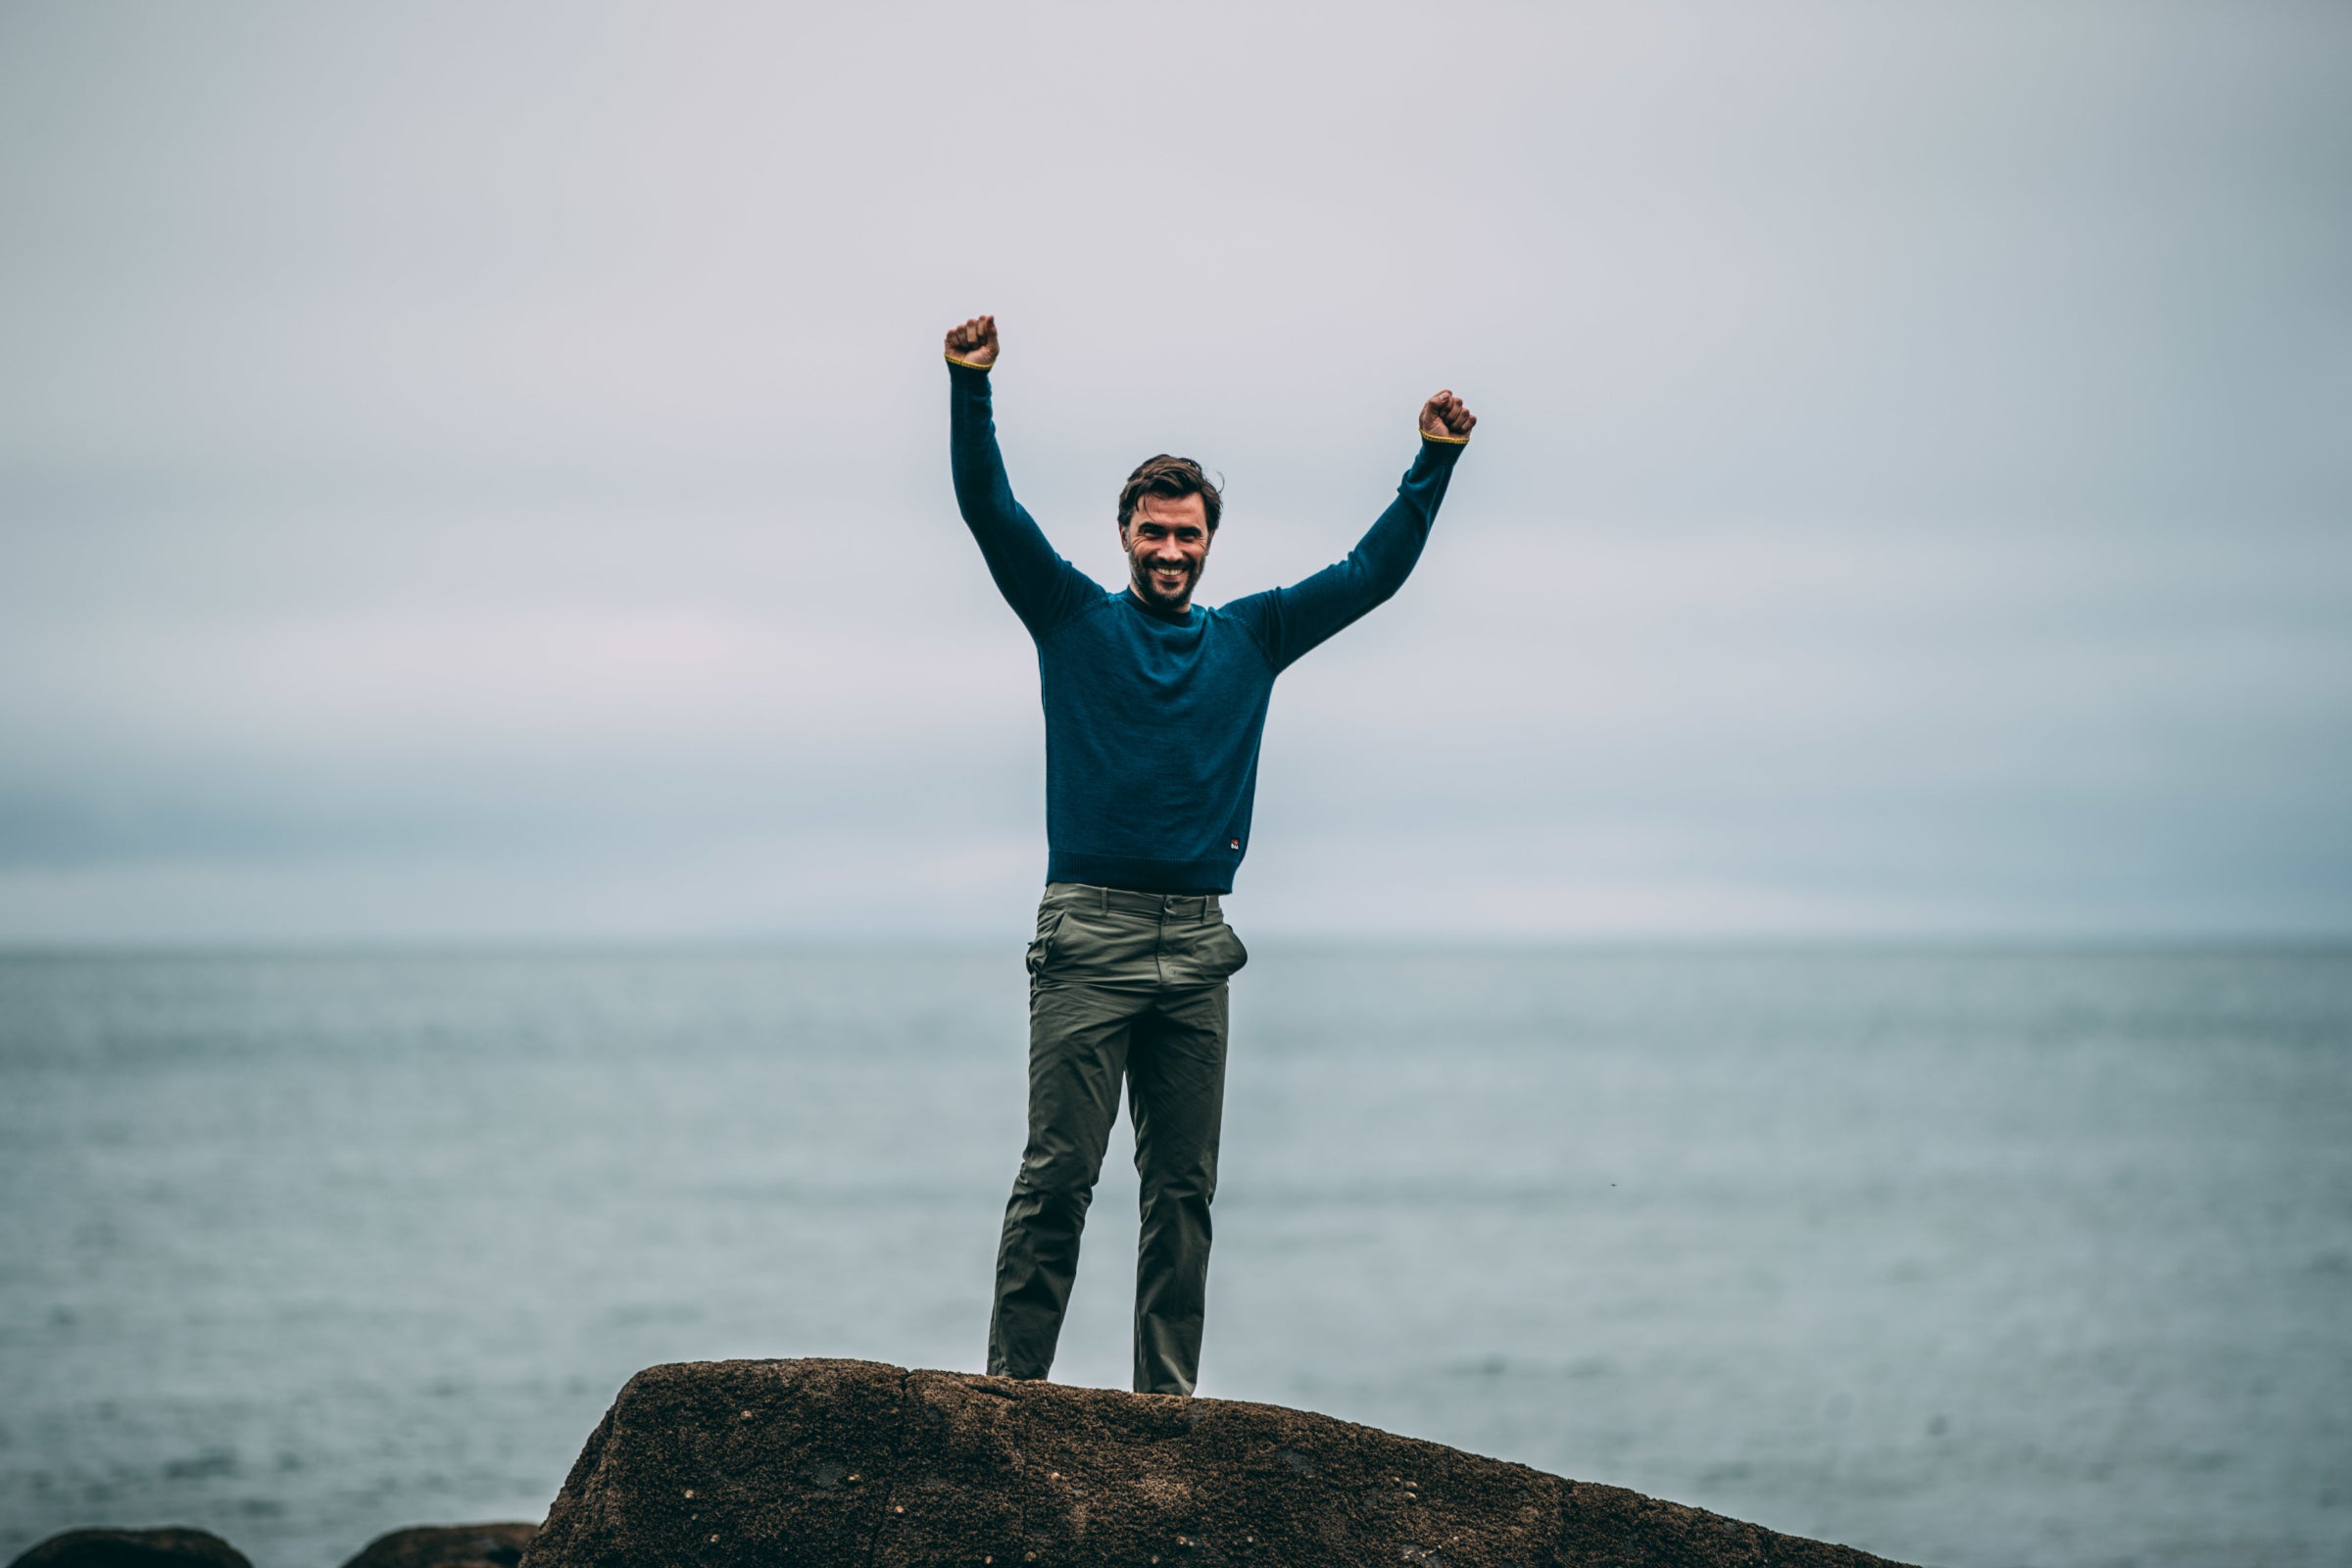 A man standing triumphantly on a rocky shore with his arms raised, wearing a blue merino sweater and green trousers, with an overcast sea in the background.